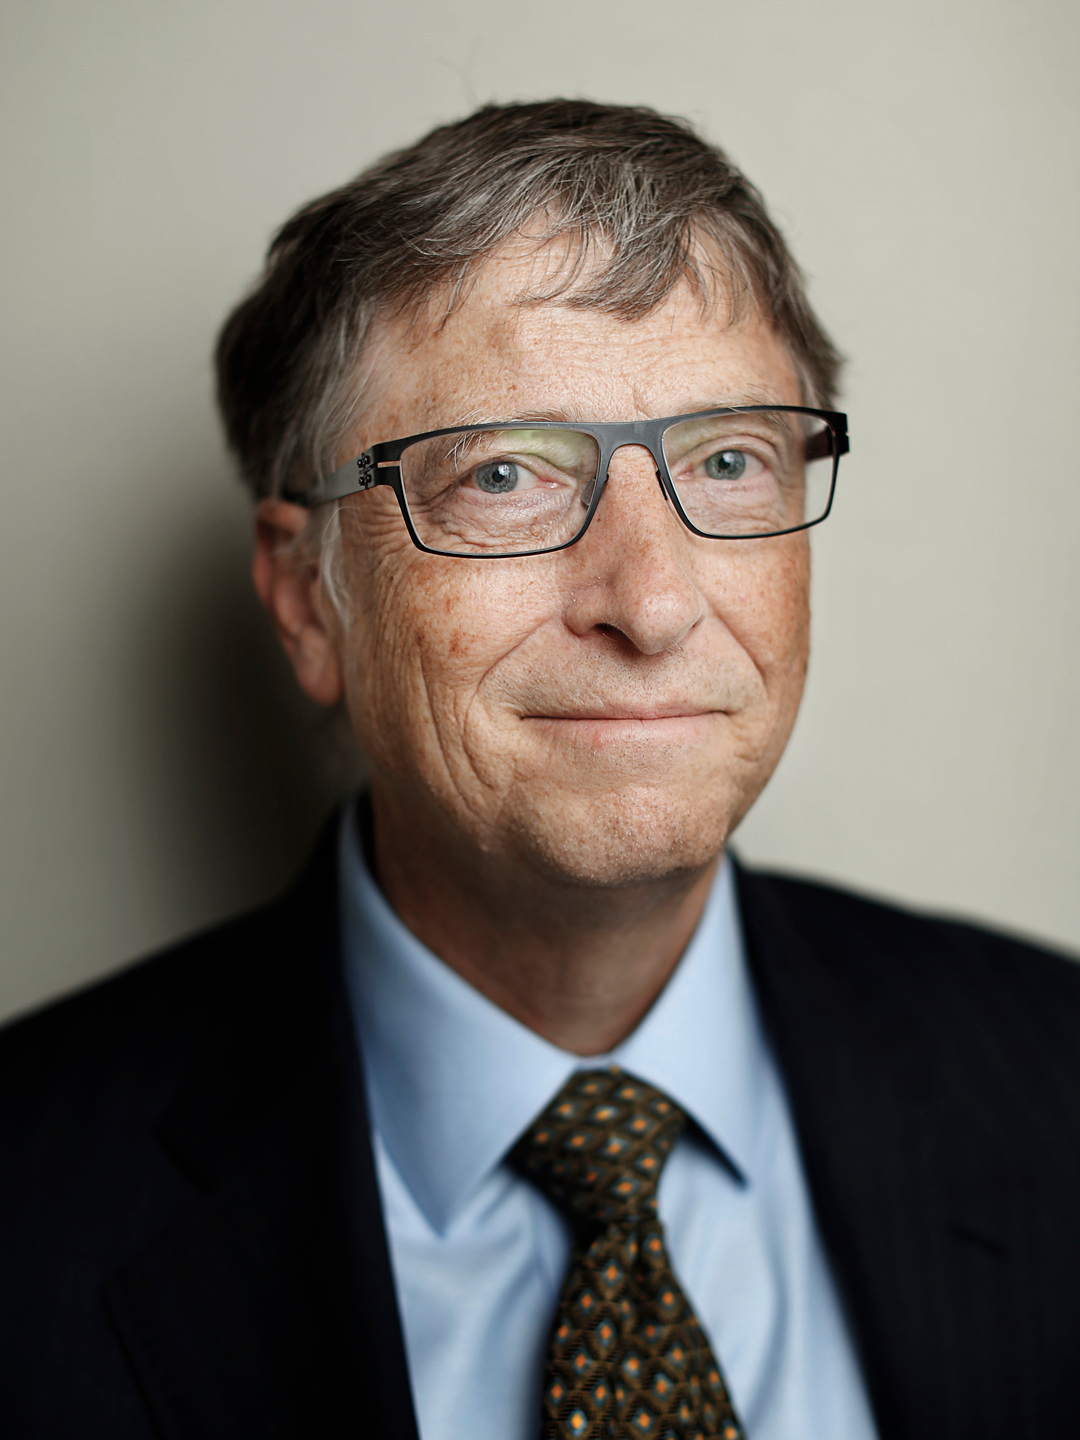 Bill Gates who are his parents